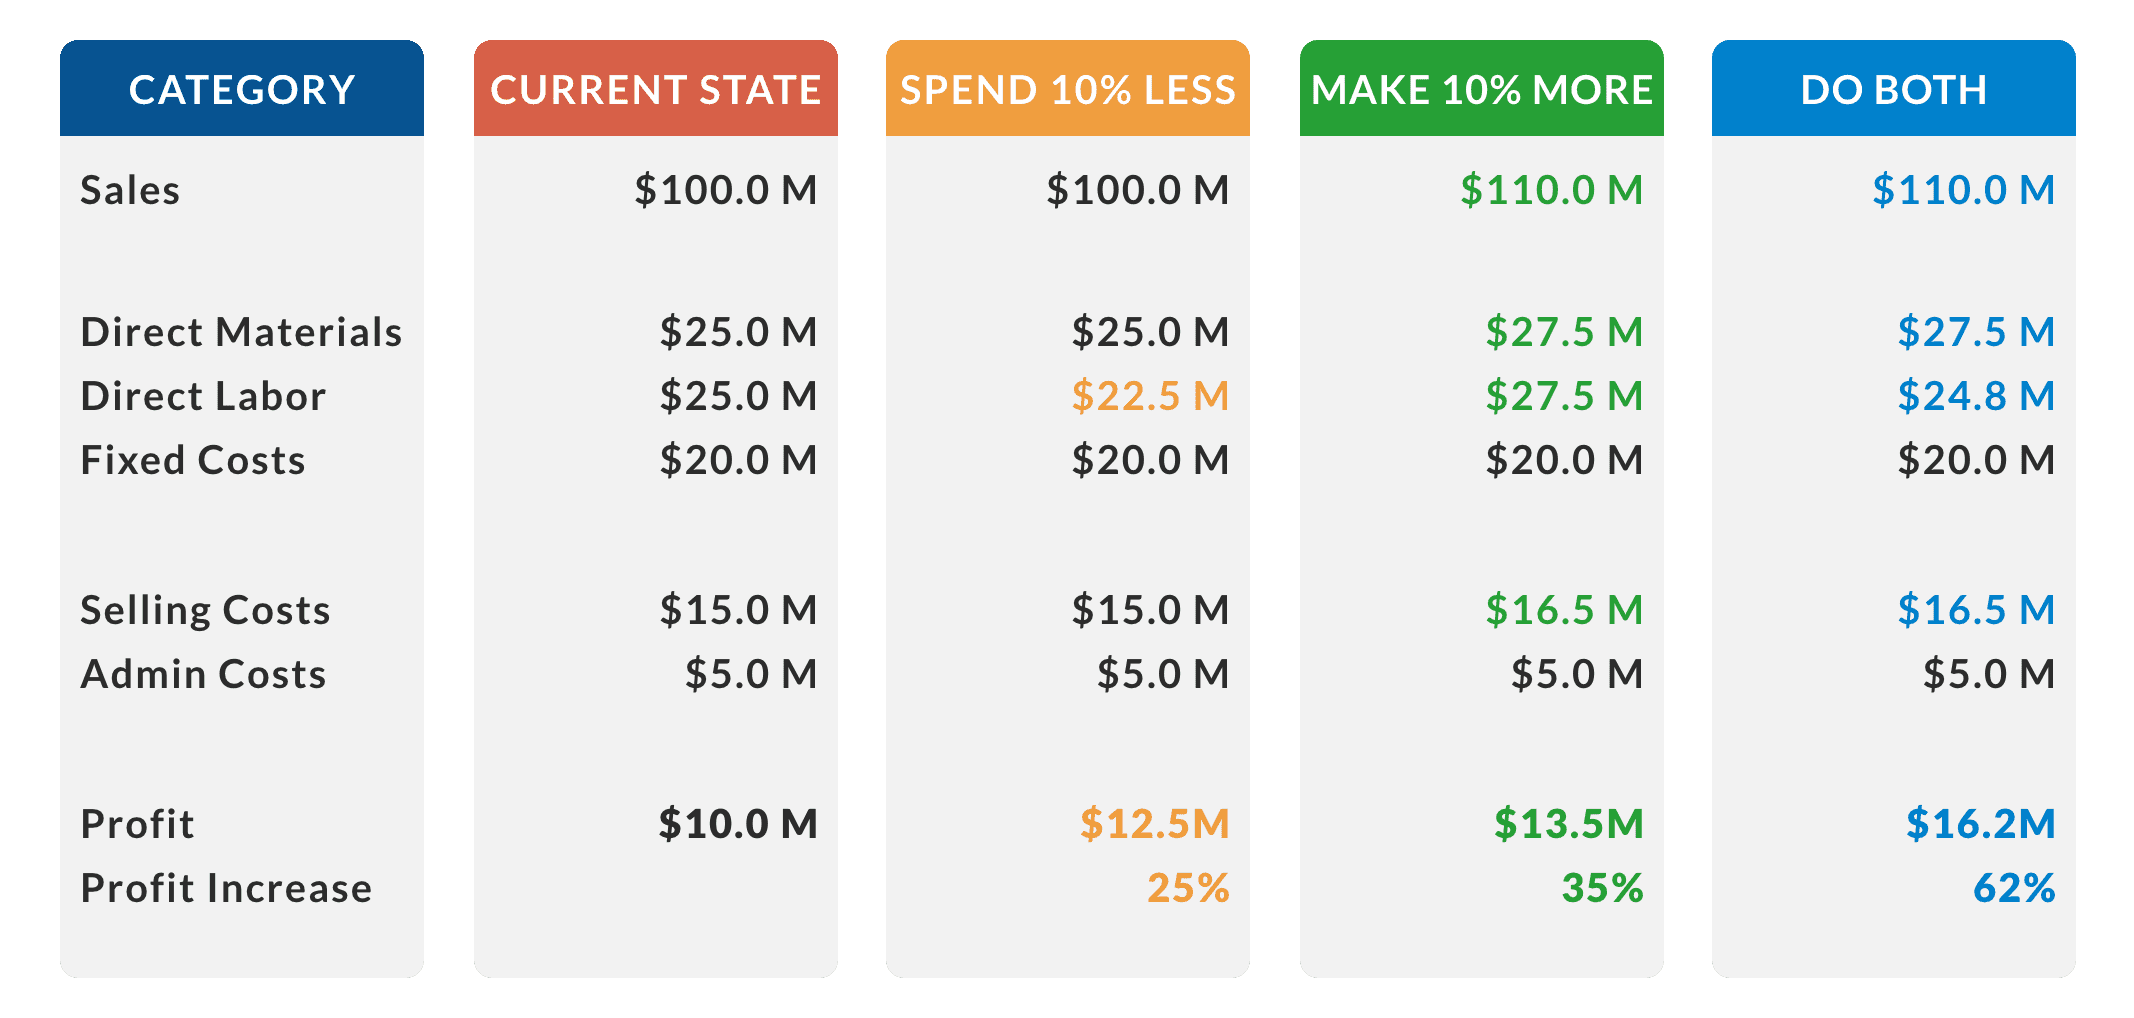 Table showing that if you spend 10% less and make 10% more, you can increase profits by 62%.